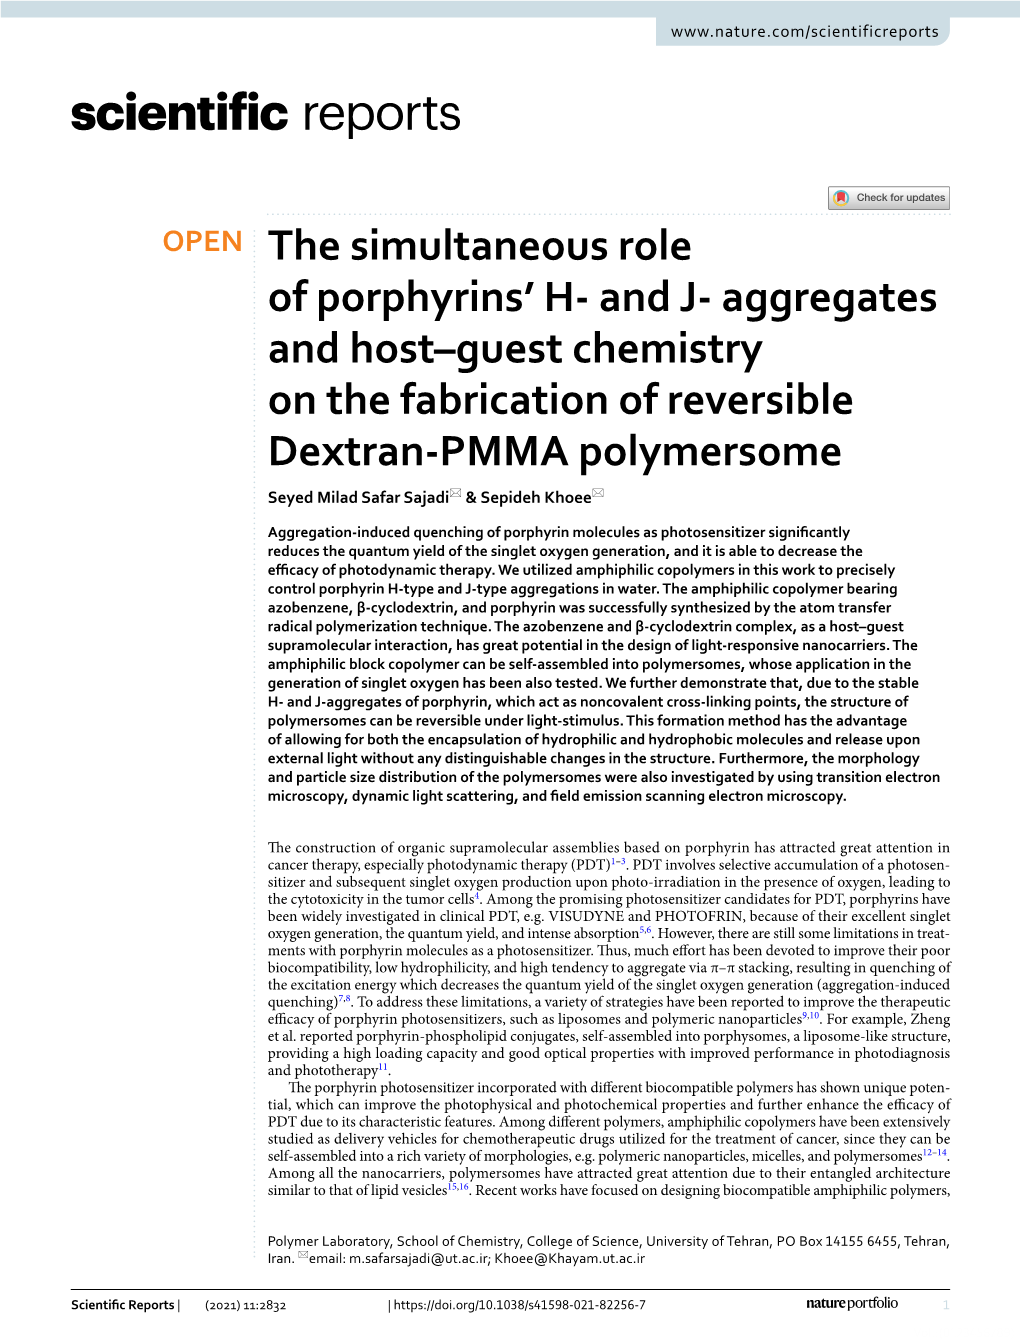 The Simultaneous Role of Porphyrins' H- and J- Aggregates and Host–Guest